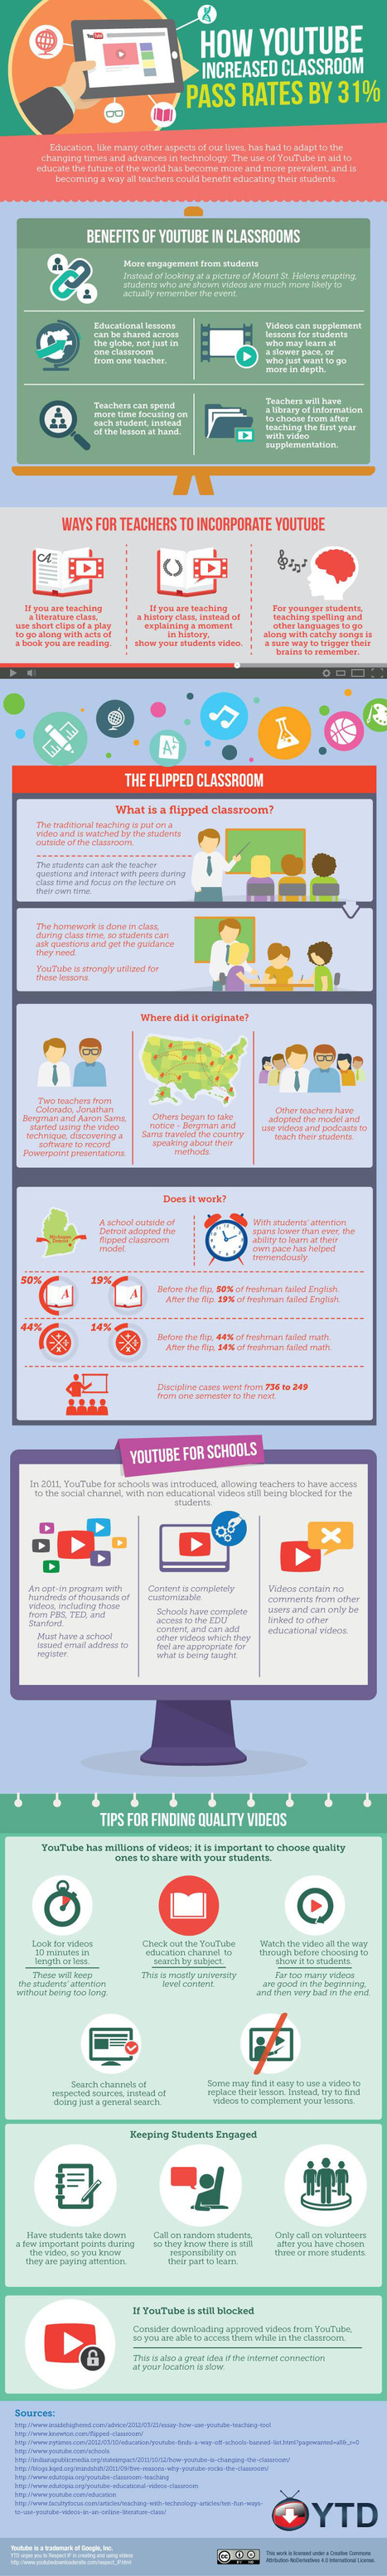 Teaching With YouTube (Infographic) | Personal Branding & Leadership Coaching | Scoop.it